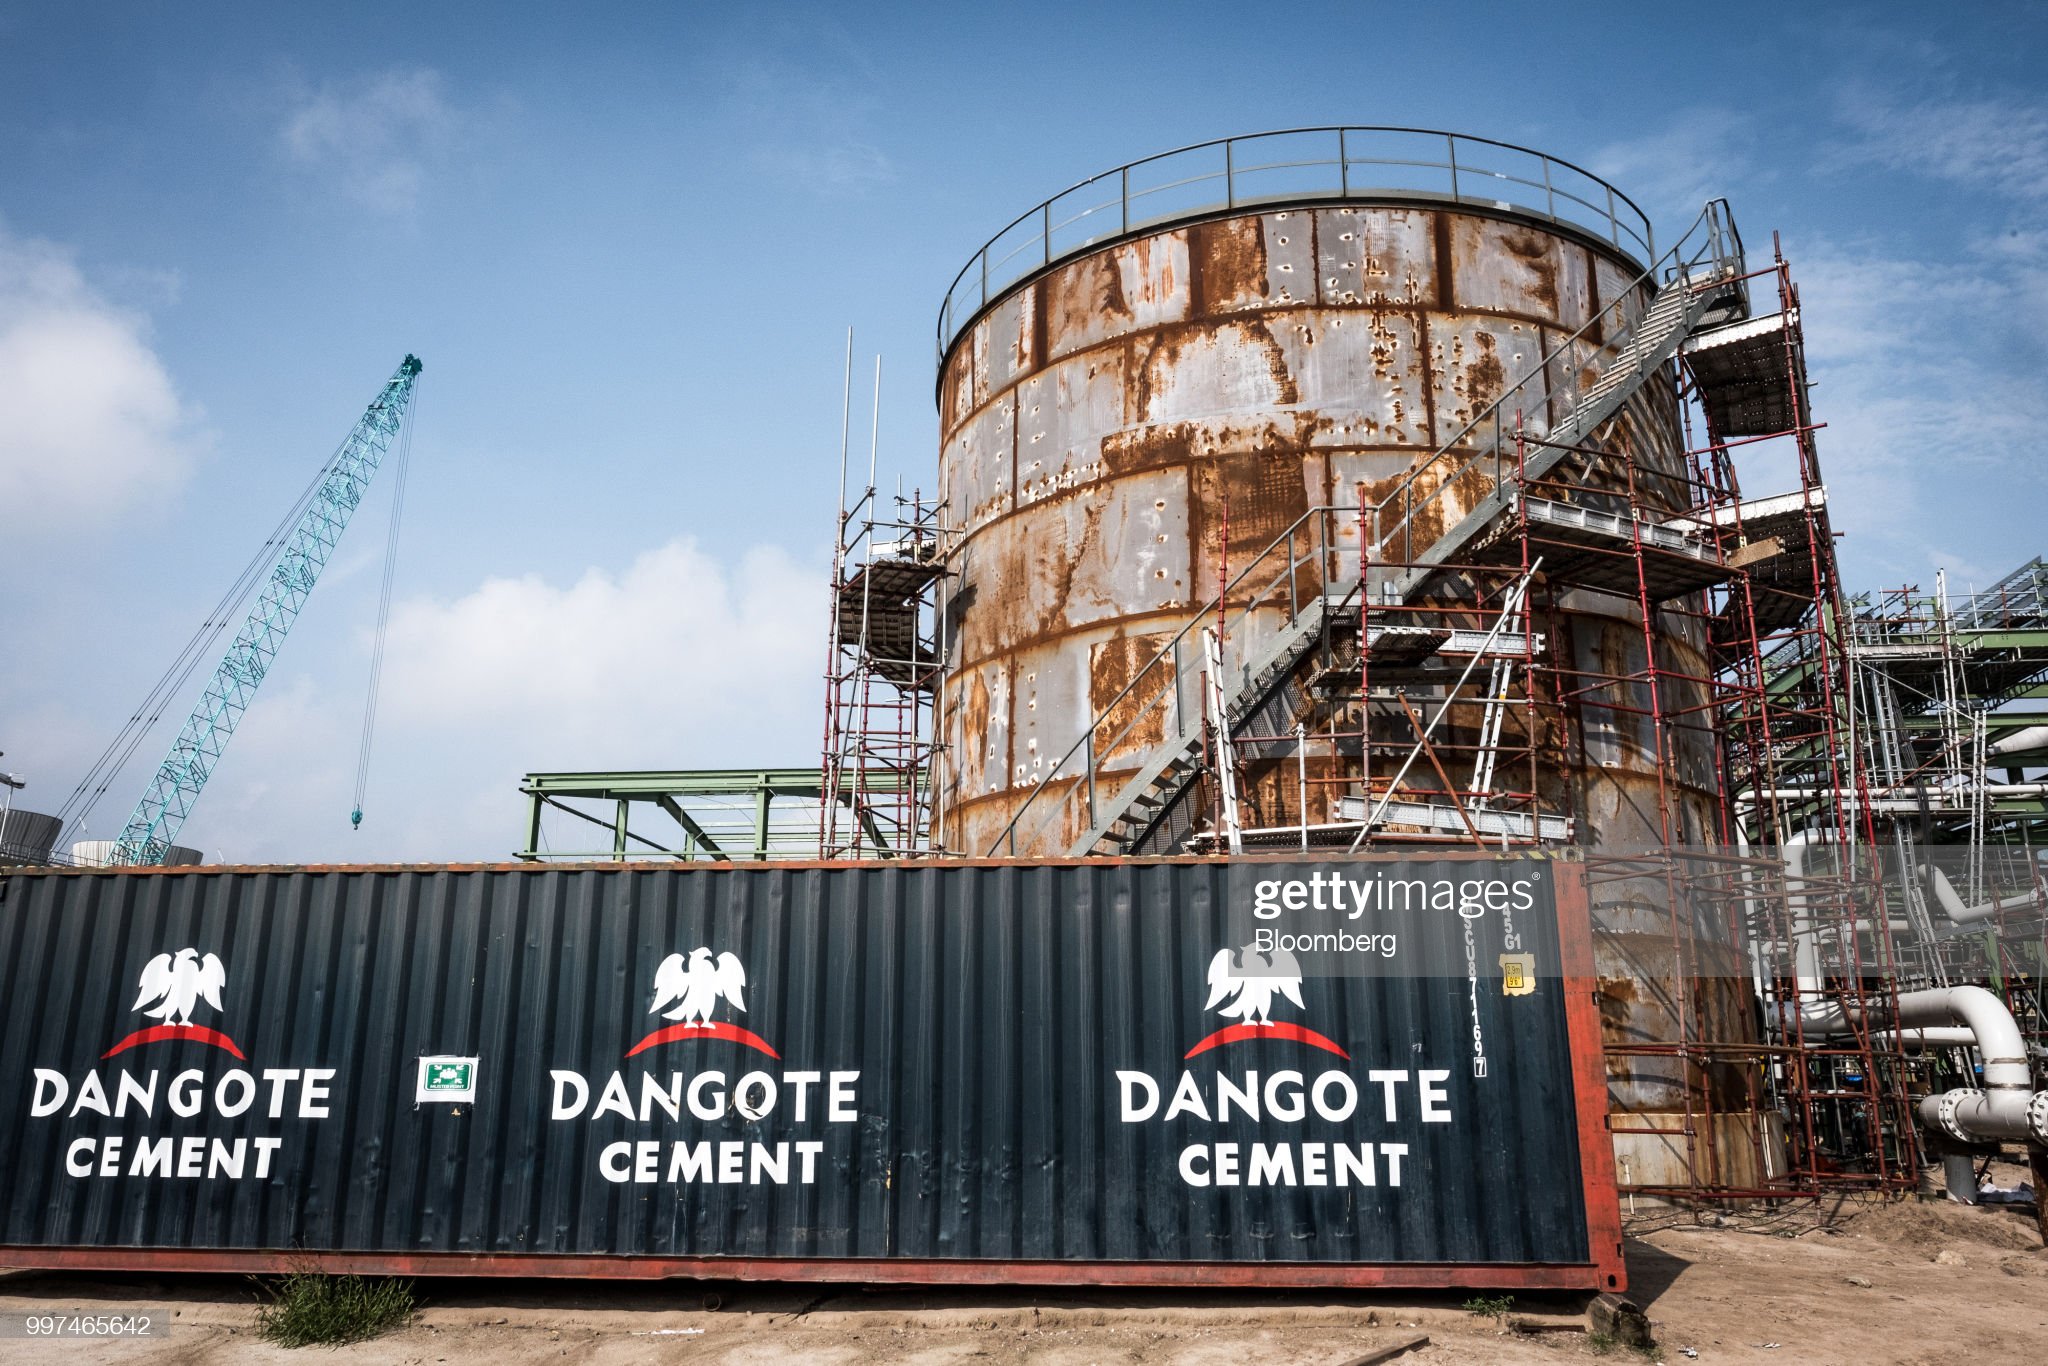 The Dangote Cement Plc logo stands on a barrier at the under-construction Dangote Industries Ltd. oil refinery and fertilizer plant site in the Ibeju Lekki district, outside of Lagos, Nigeria, on Thursday, July 5, 2018. The $10 billion refinery, set to be one of the worlds largest and process 650,000 barrels of crude a day, should be near full capacity by mid-2020, Devakumar Edwin, group executive director at Dangote Industries said in an interview. Photographer: Tom Saater/Bloomberg via Getty Images